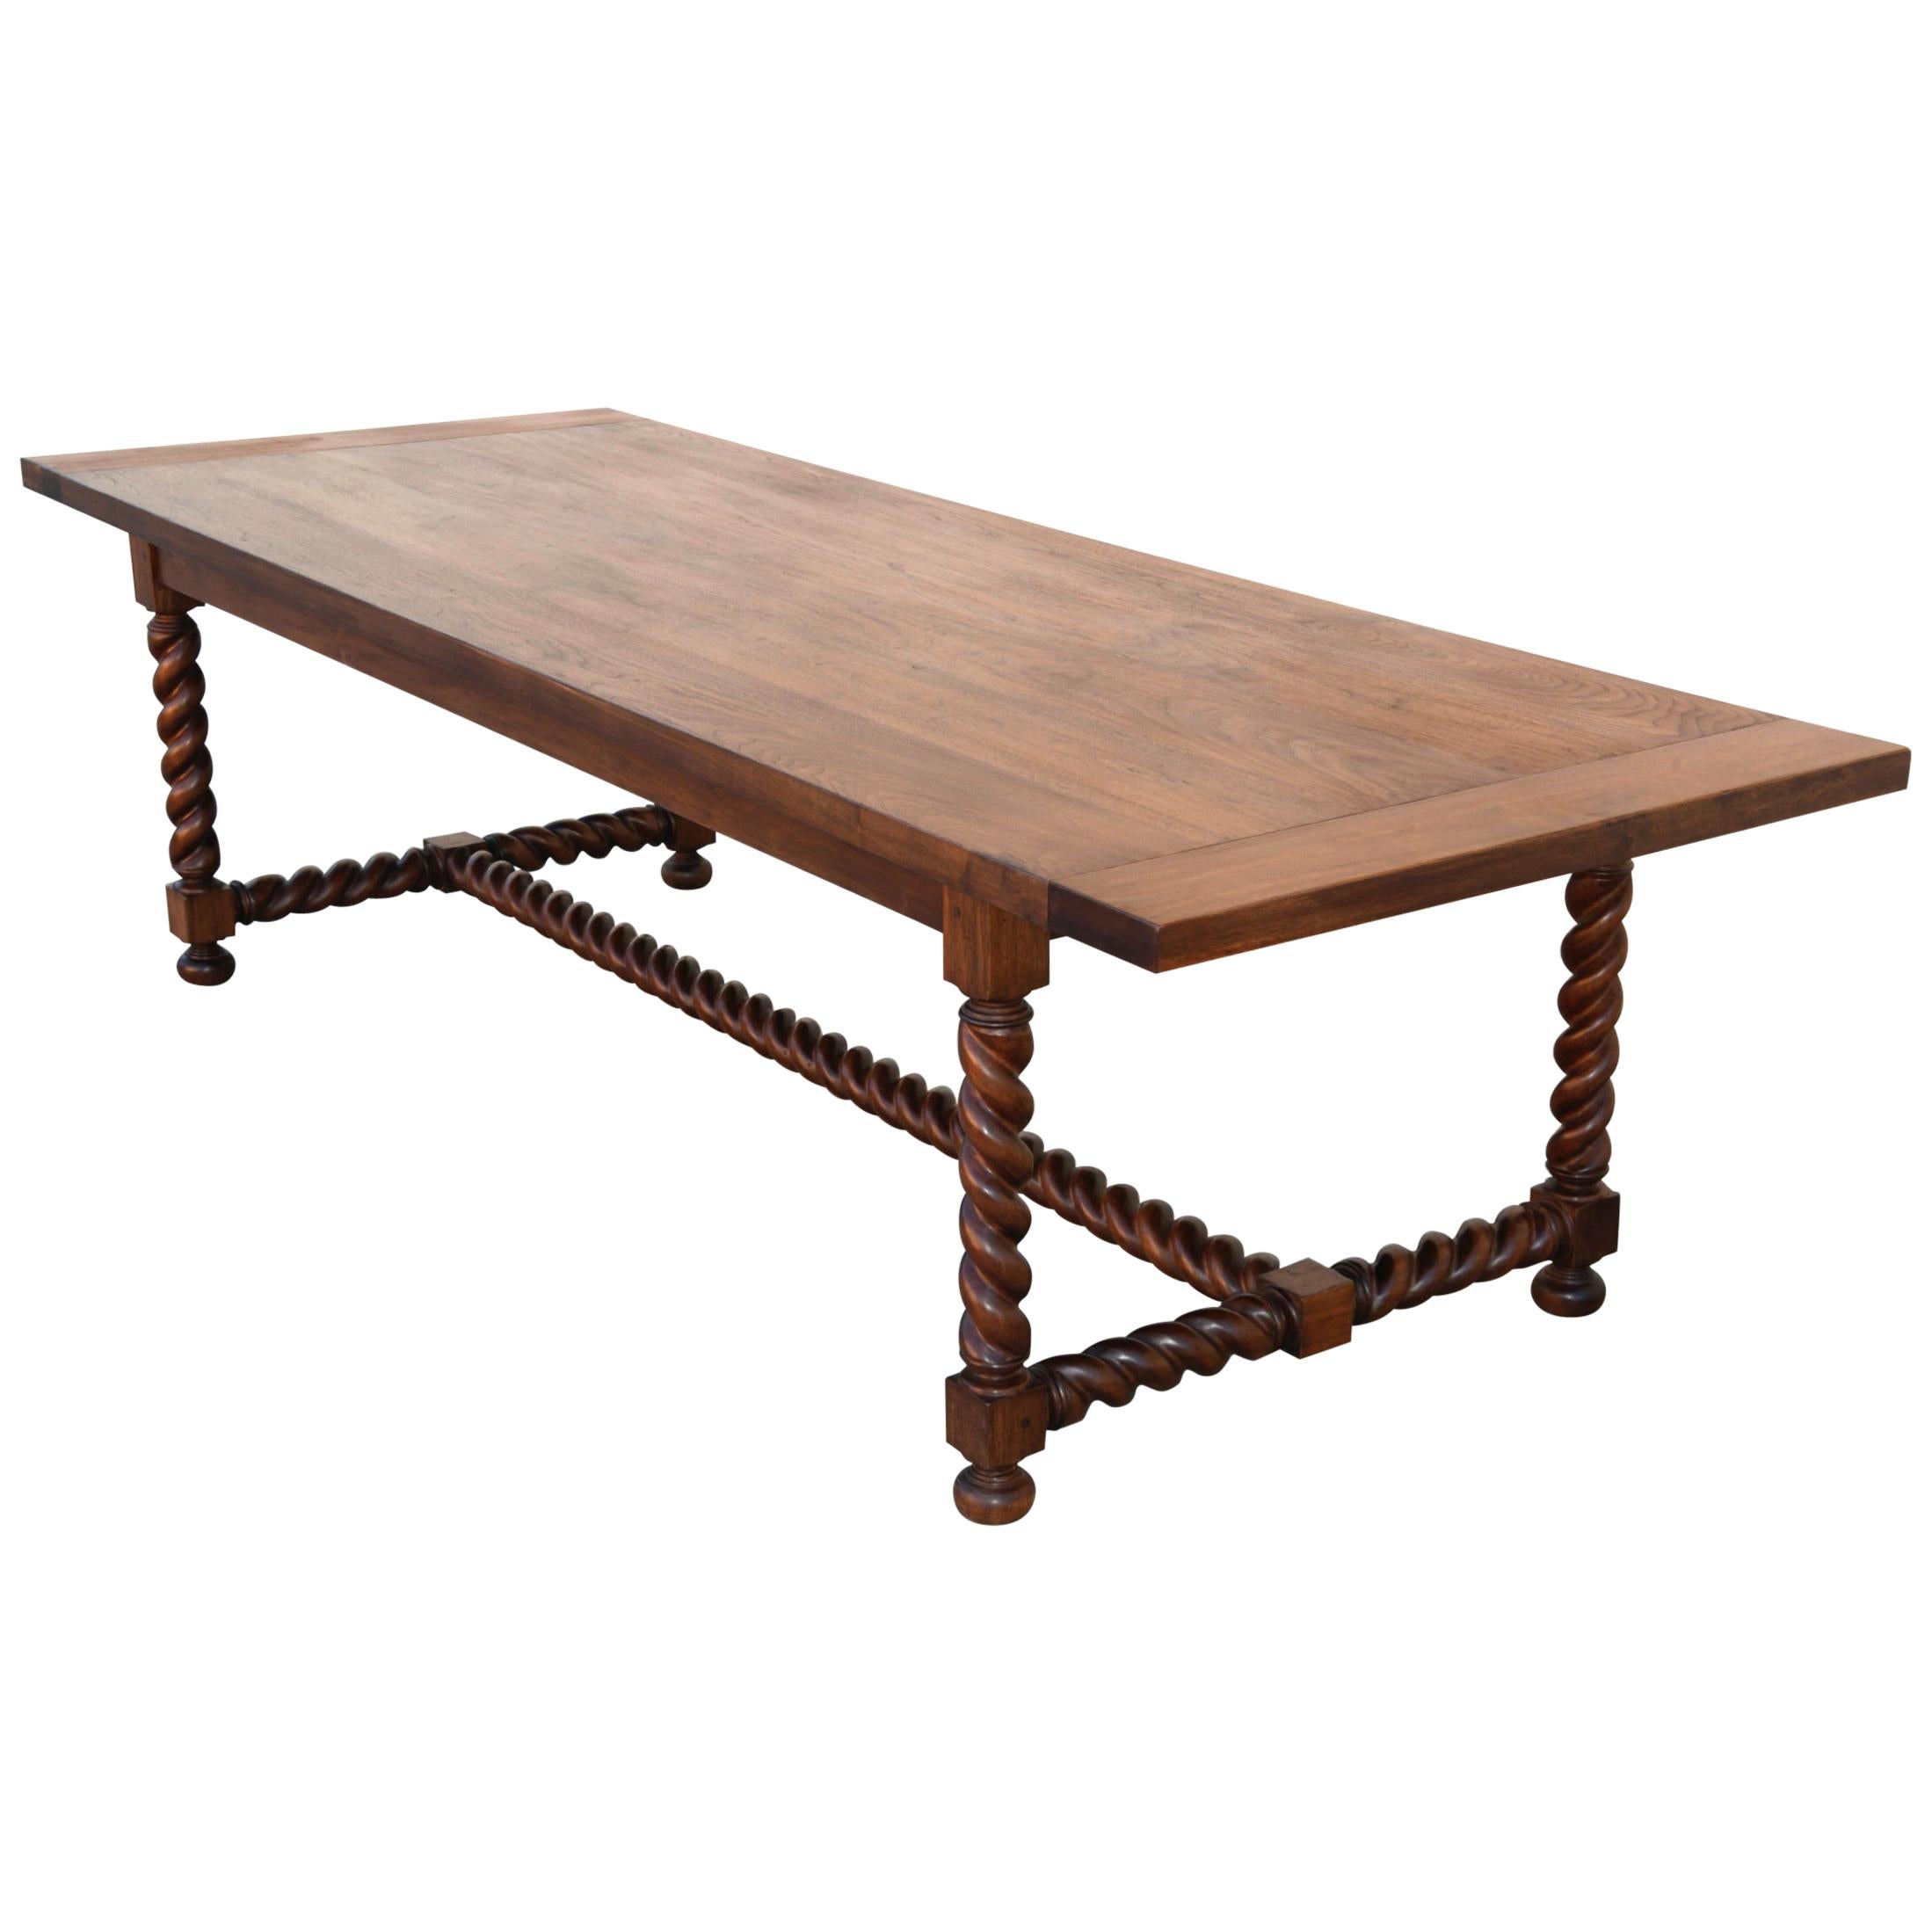 Expandable Barley Twist Dining Table Made from Walnut